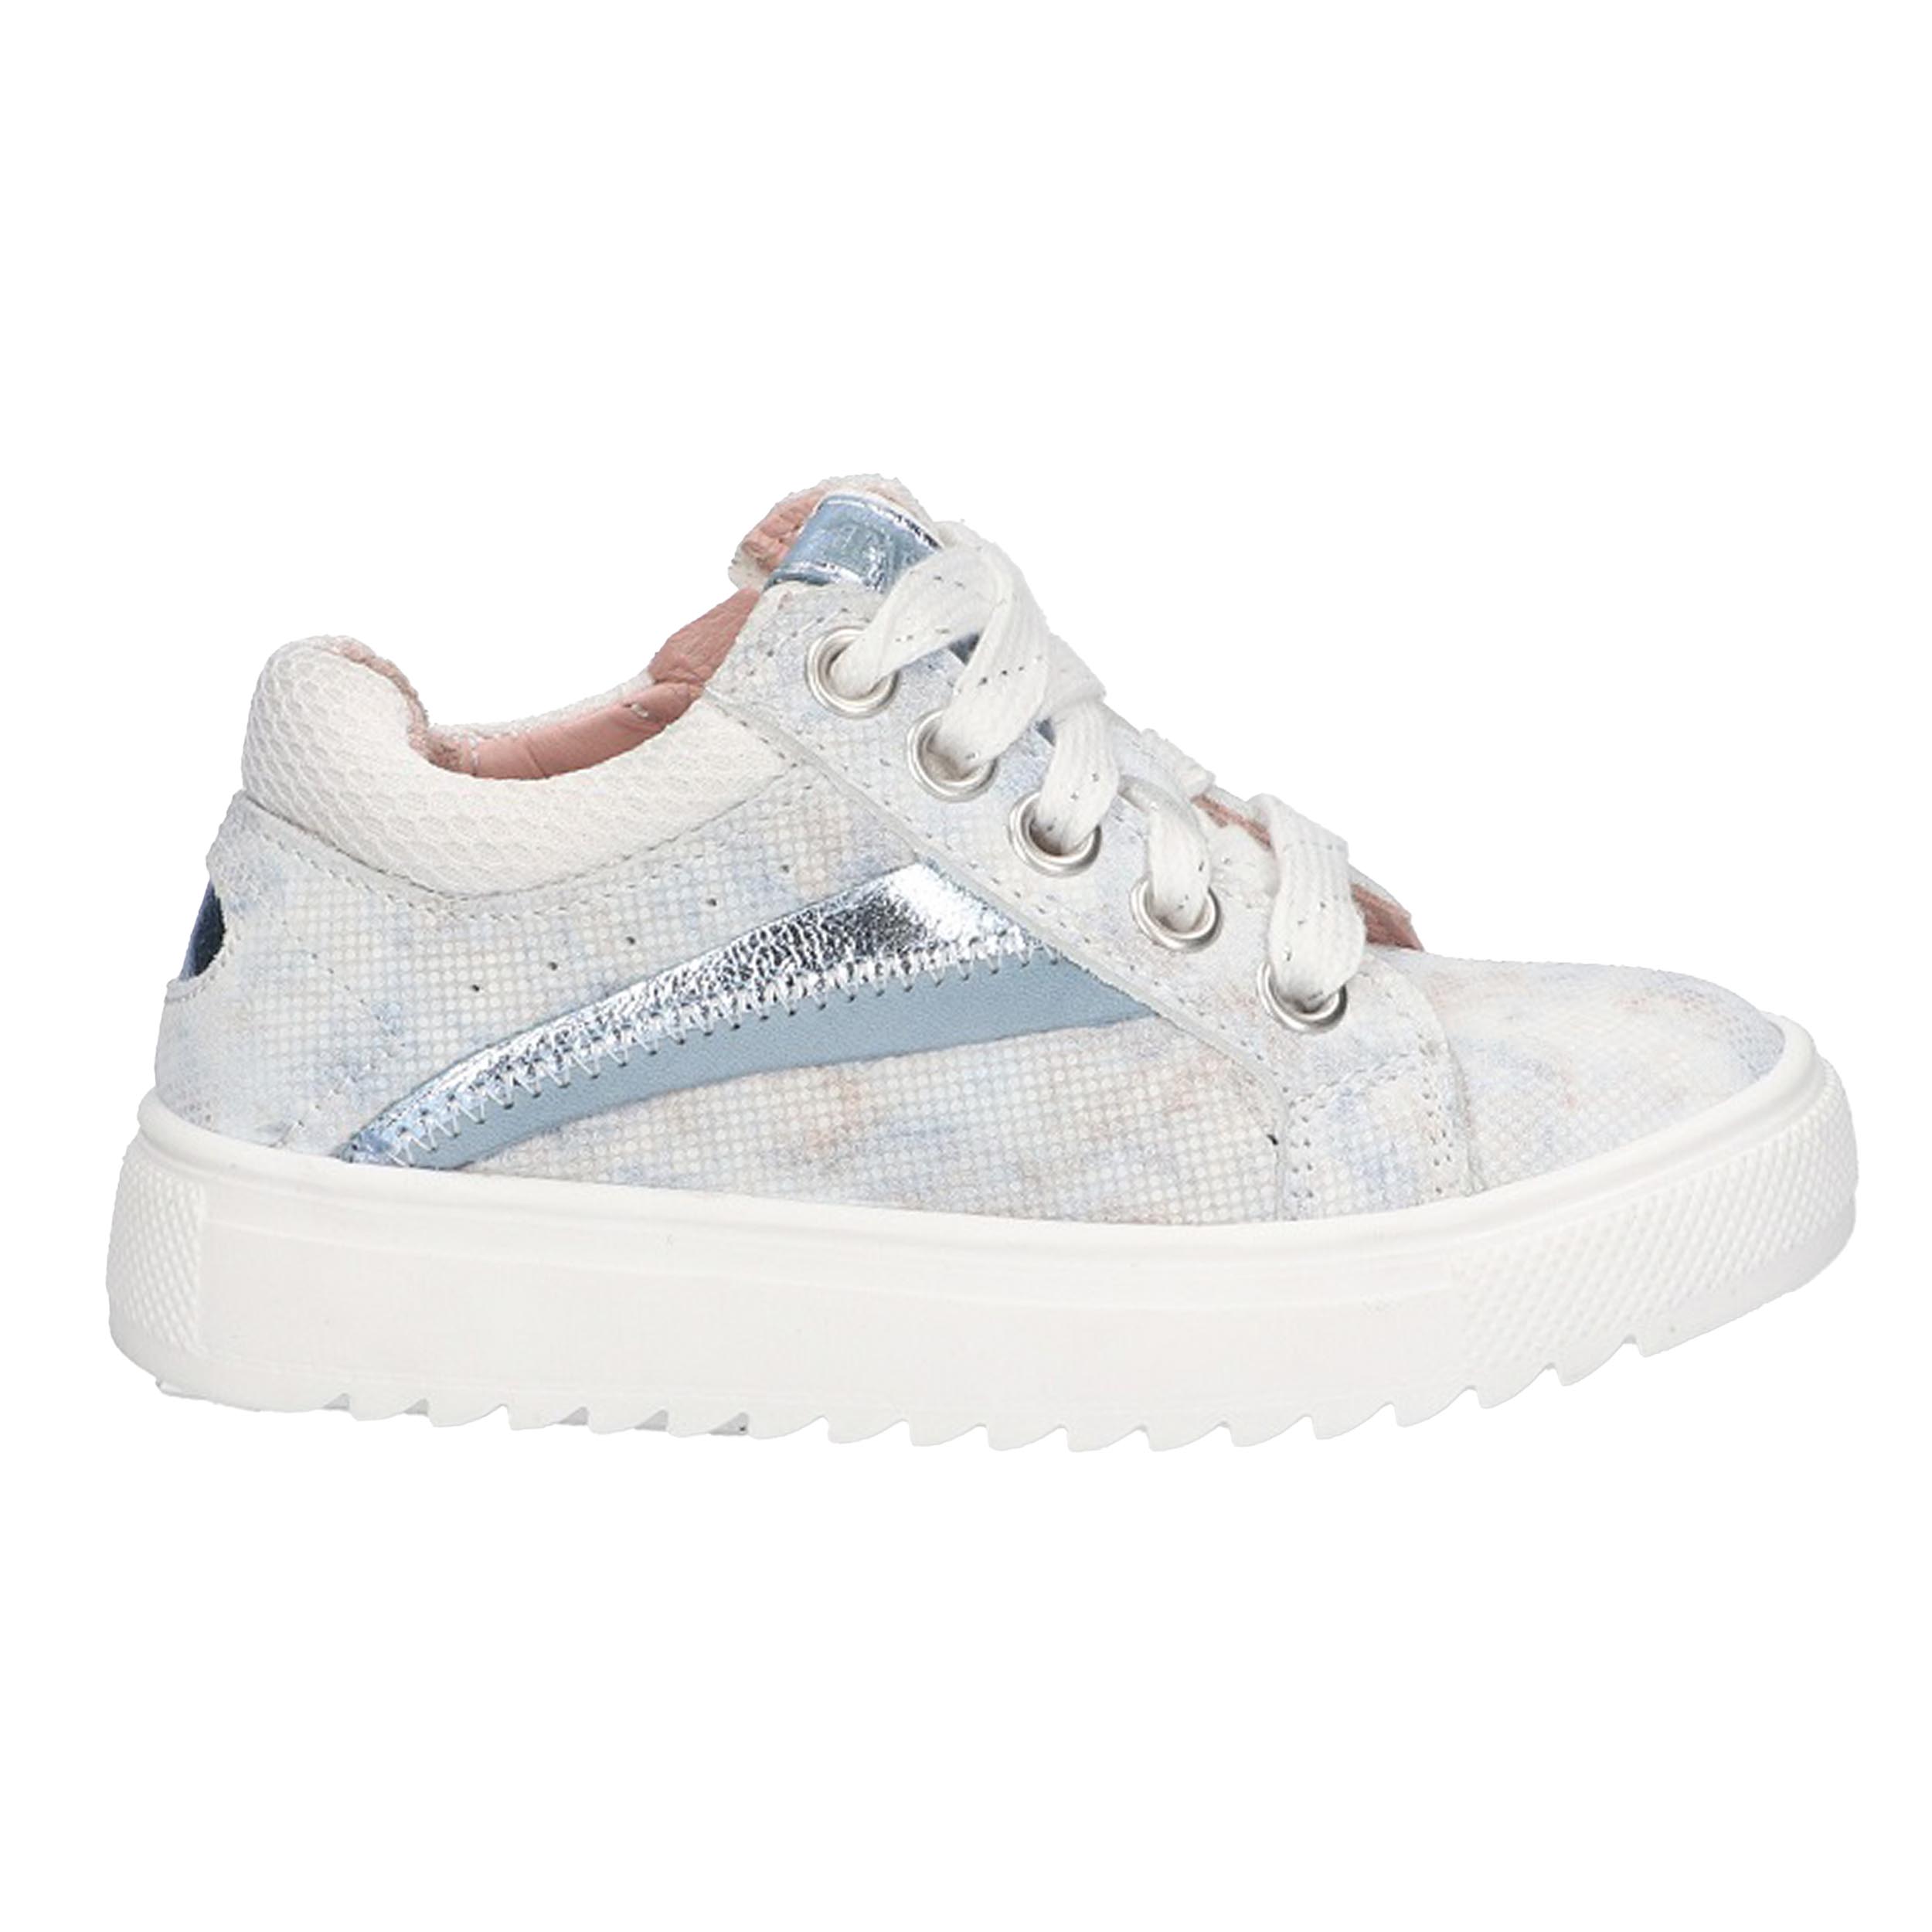 Twins 324116 Sneaker Claire Cheer Iceblue 6